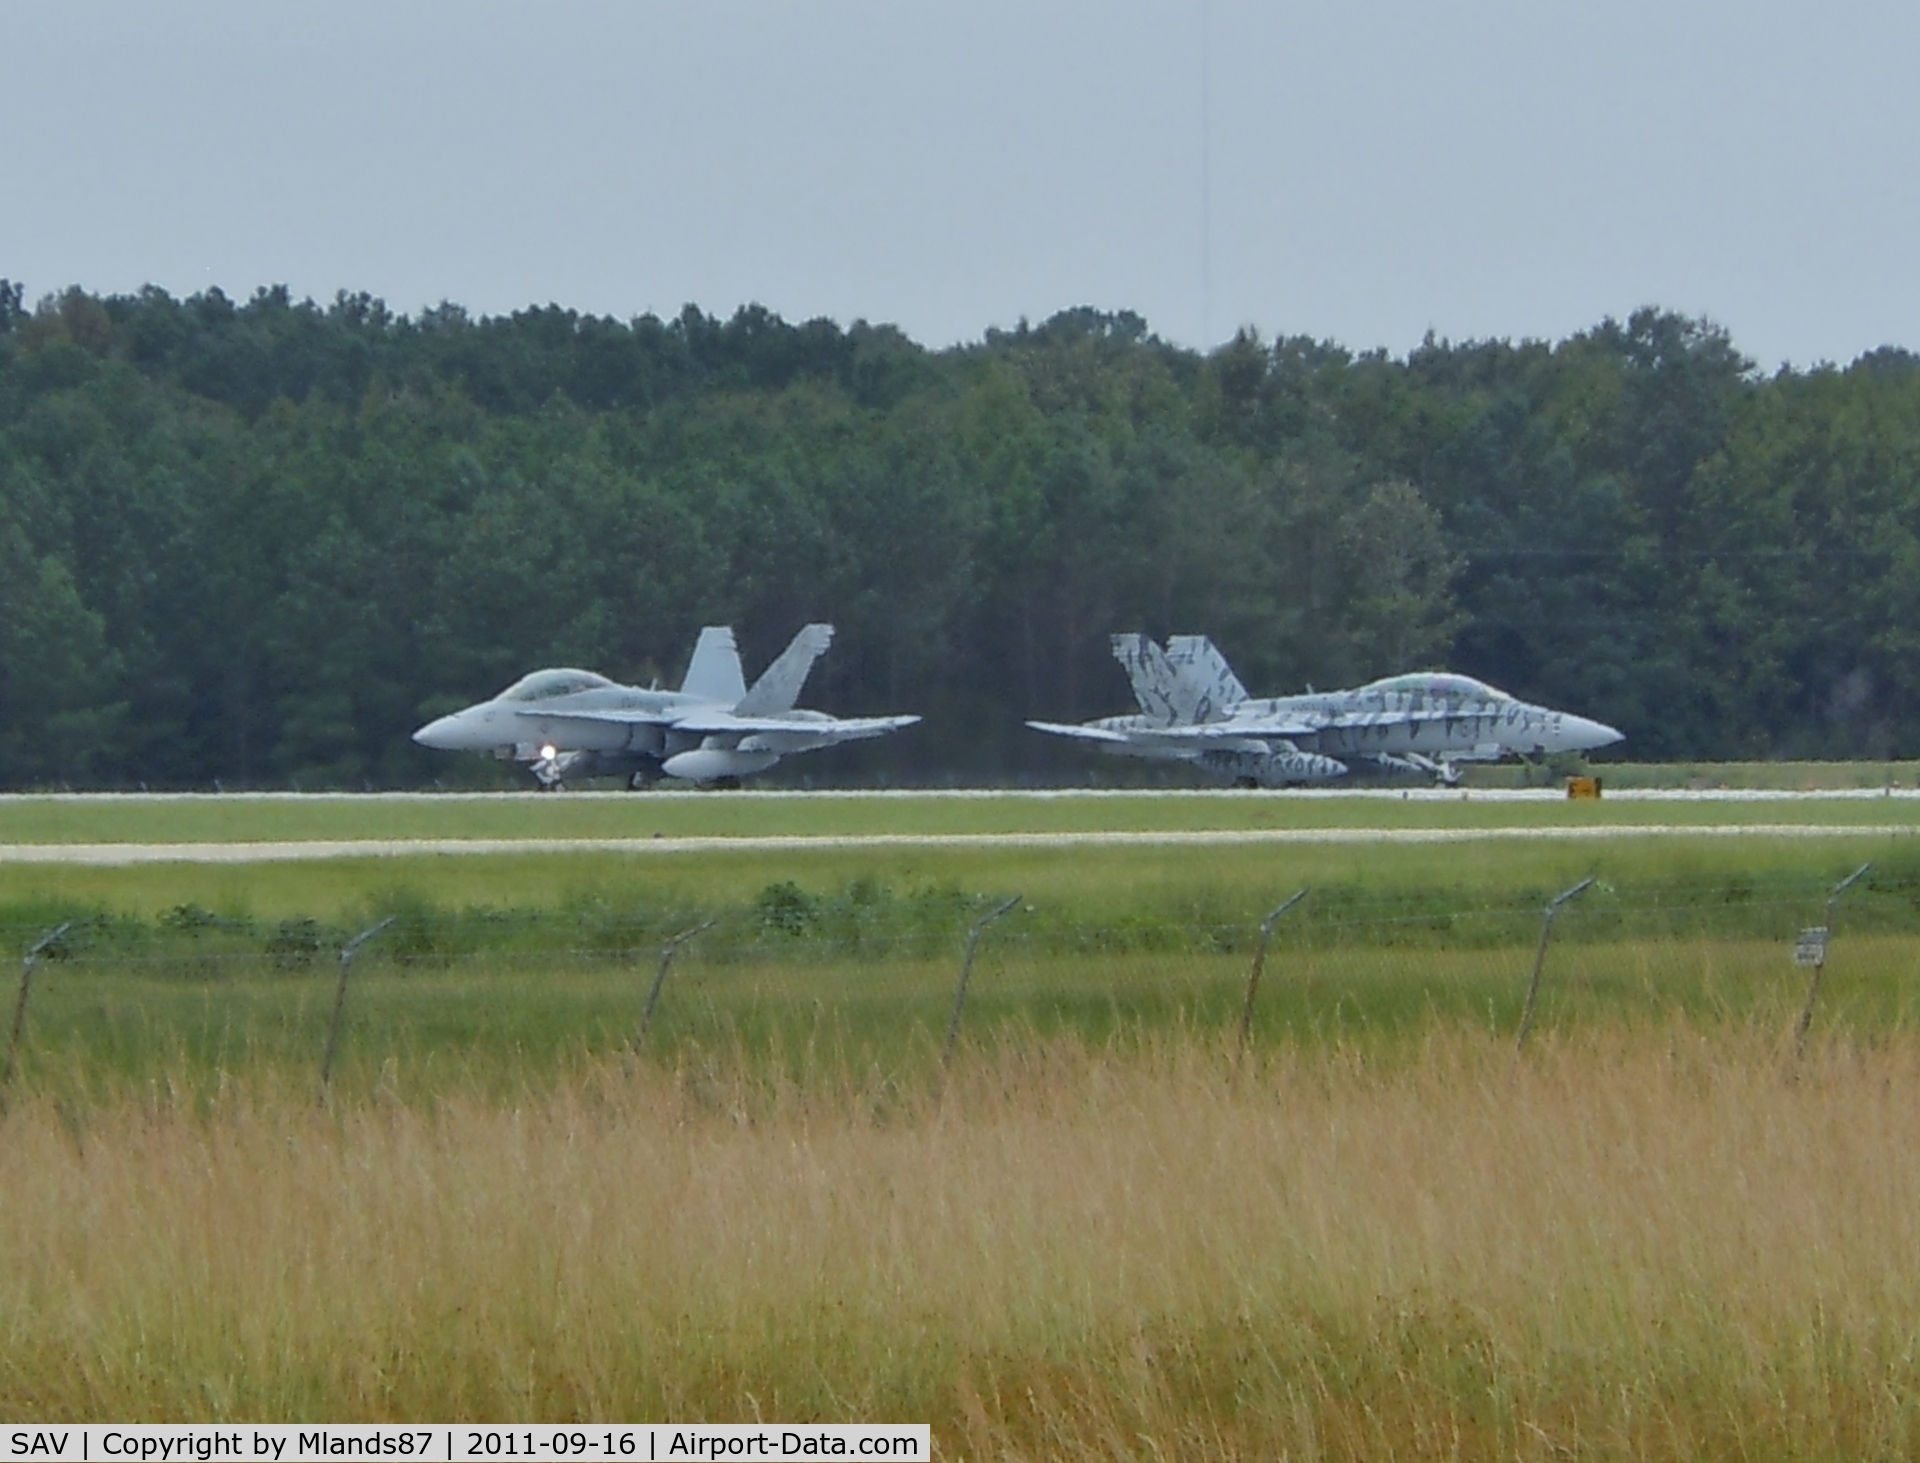 Savannah/hilton Head International Airport (SAV) - Some F-18's about to takeoff. One in some interesting paint on one.